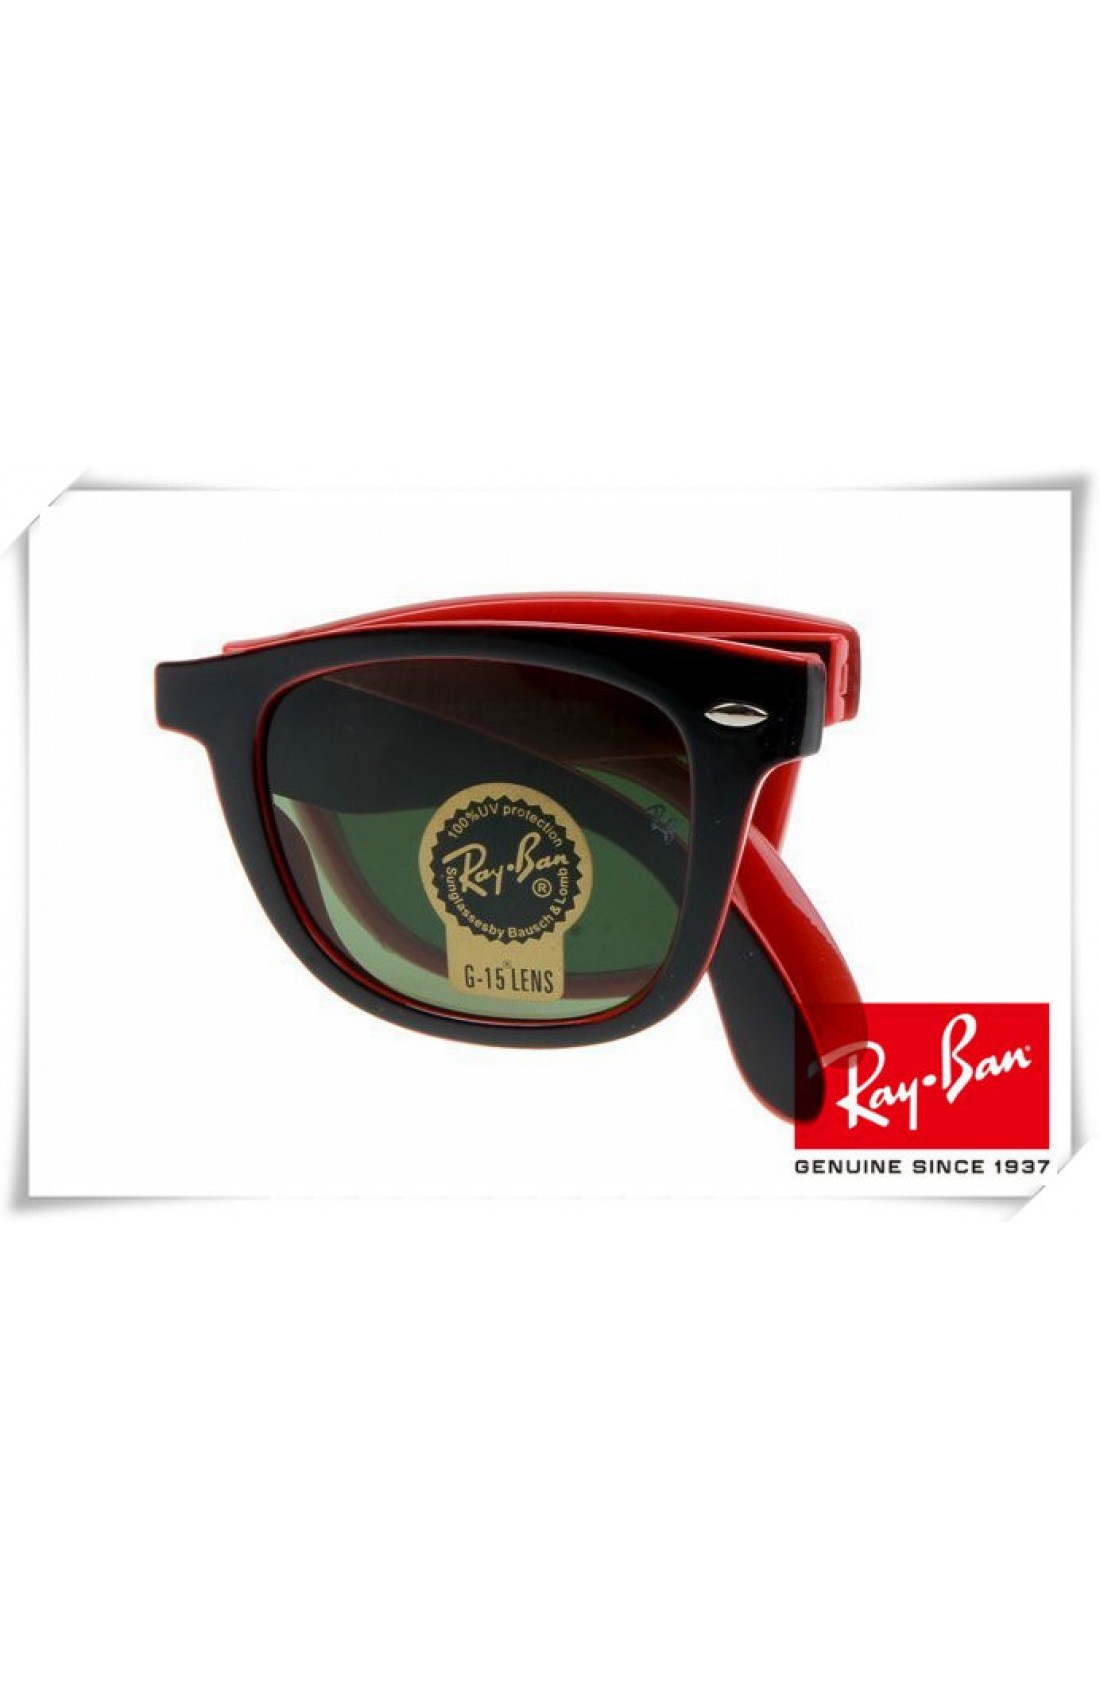 red and black ray ban sunglasses